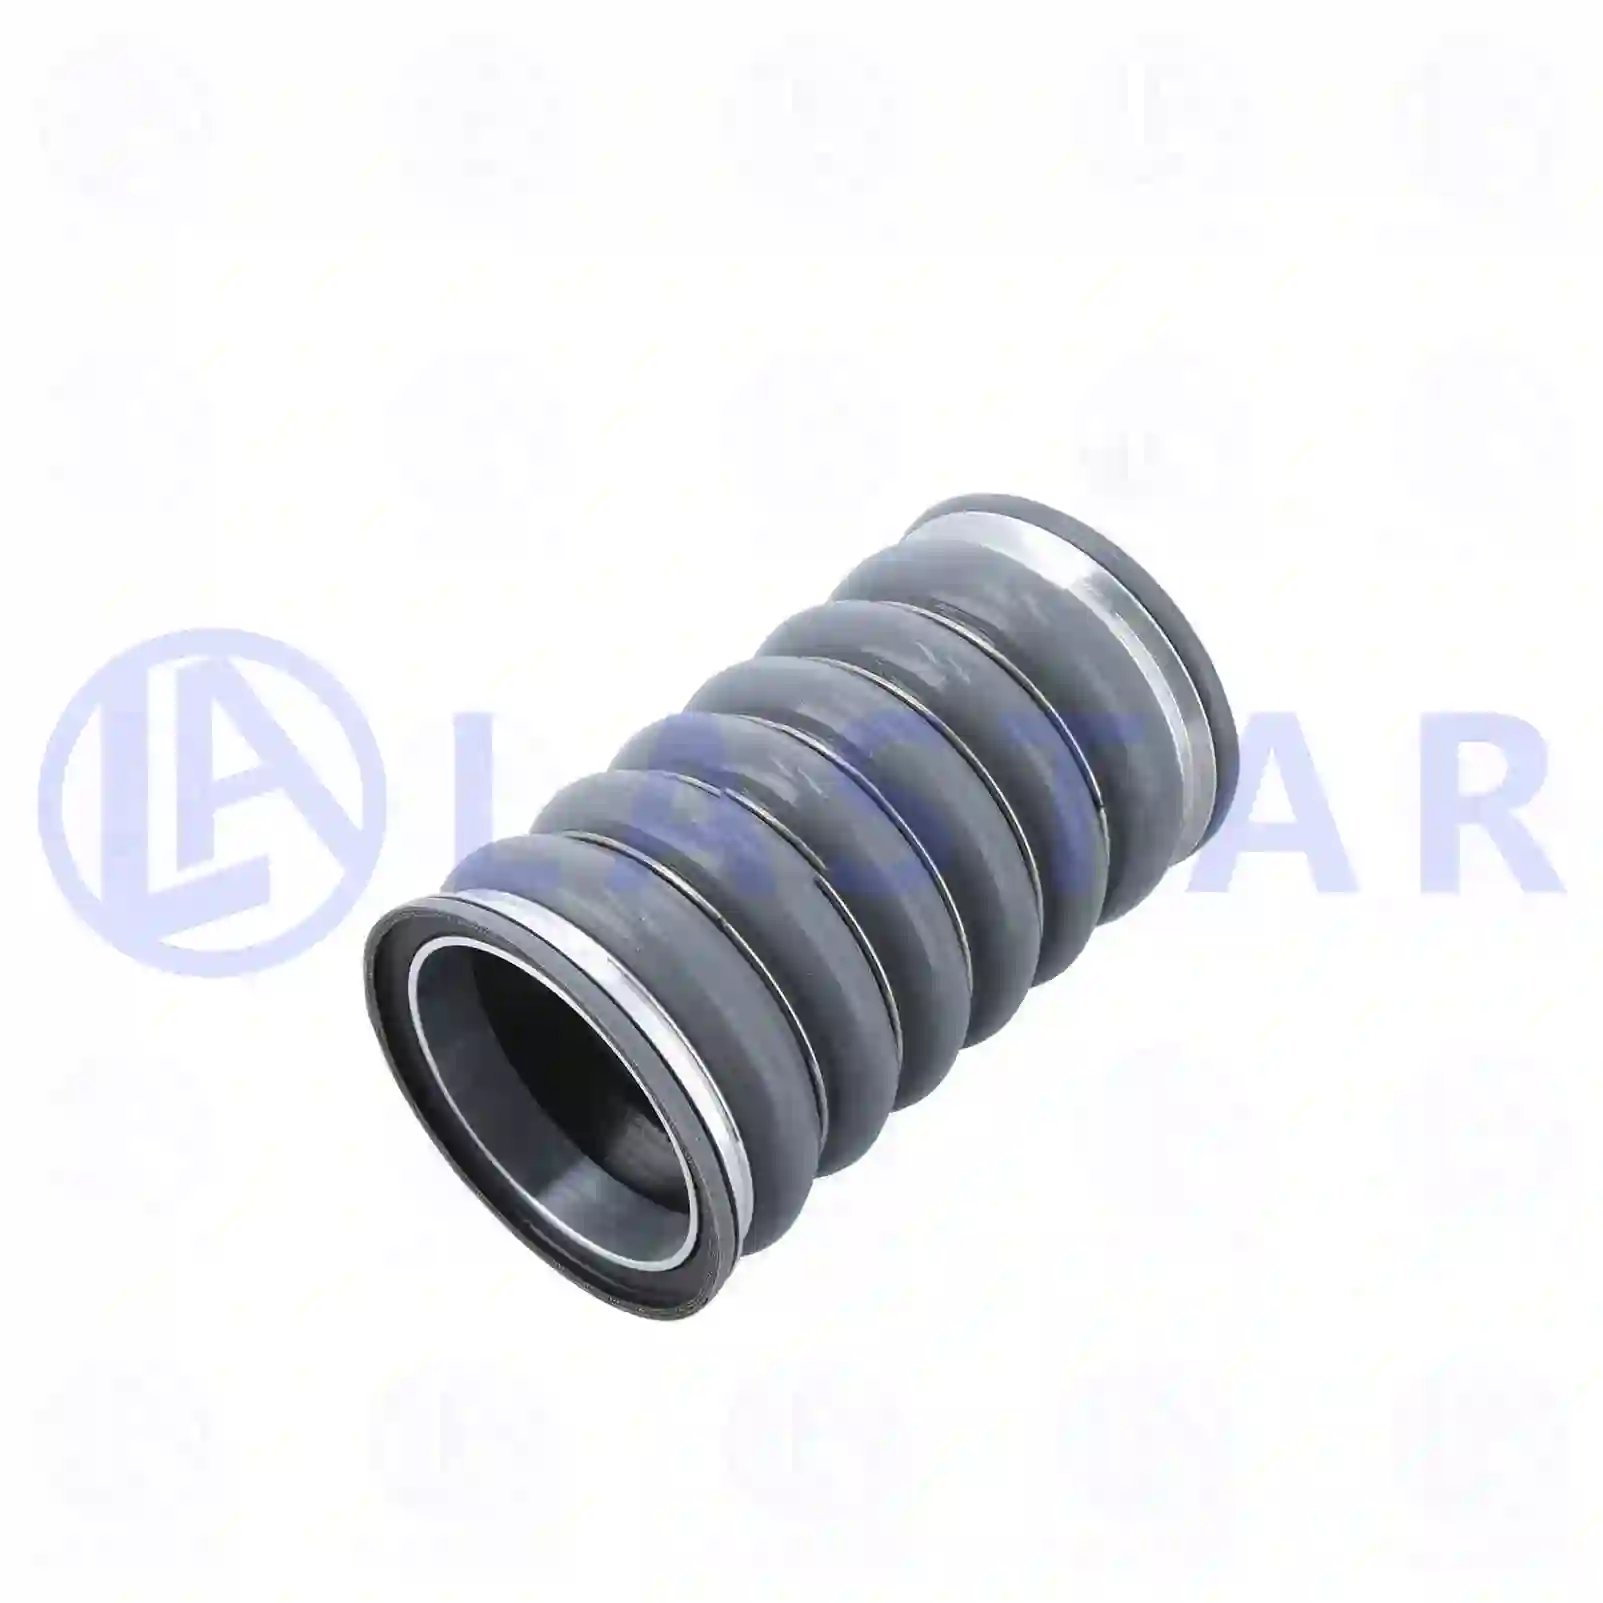 Charge air hose, 77709927, 1796393, 2057833 ||  77709927 Lastar Spare Part | Truck Spare Parts, Auotomotive Spare Parts Charge air hose, 77709927, 1796393, 2057833 ||  77709927 Lastar Spare Part | Truck Spare Parts, Auotomotive Spare Parts